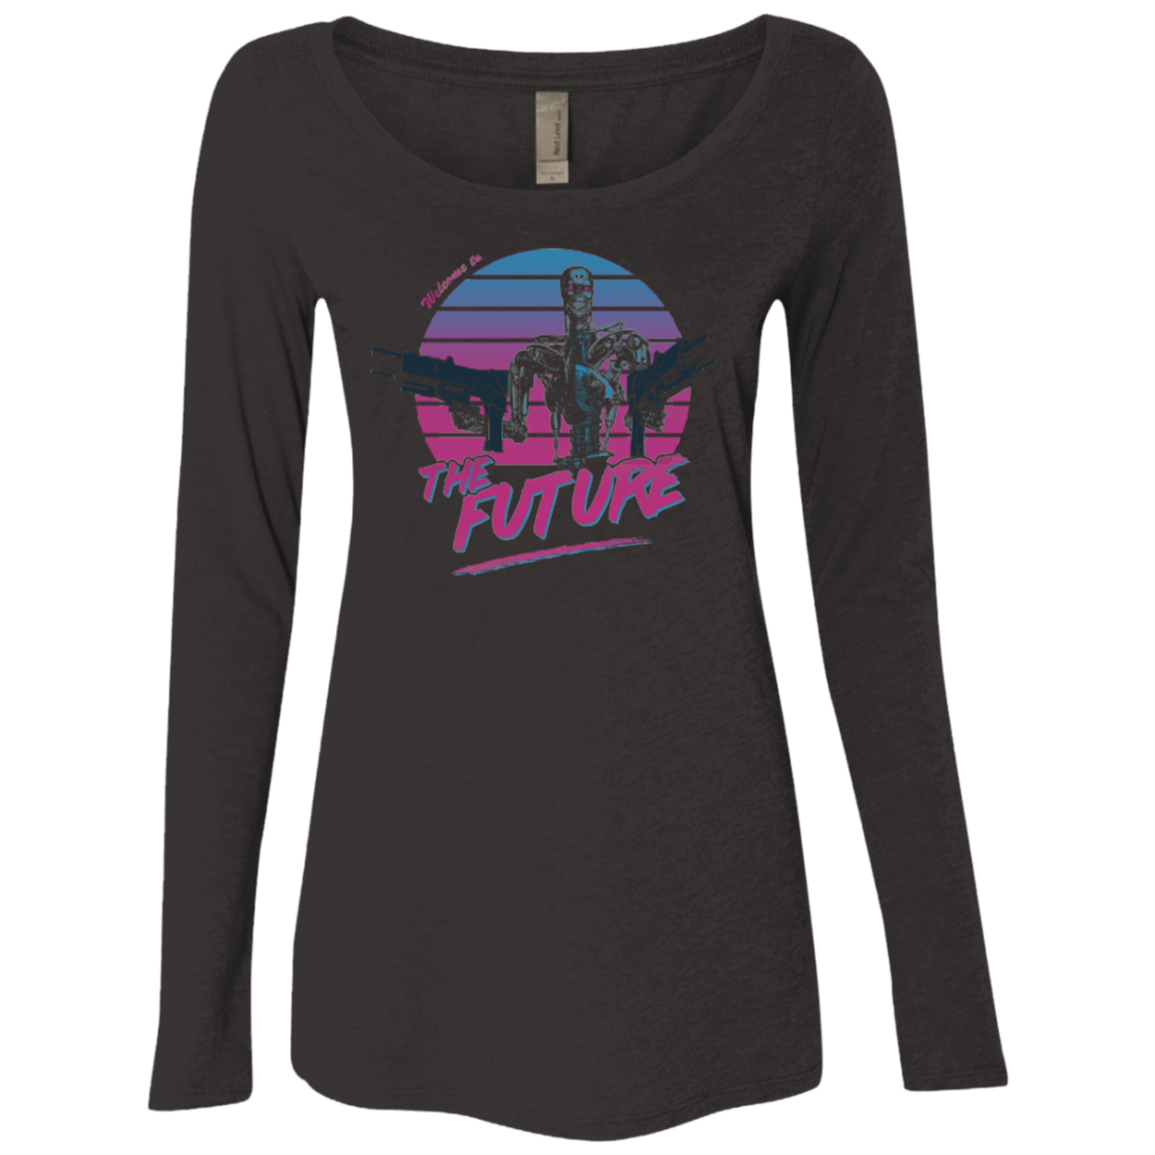 Welcome to the Future Women's Triblend Long Sleeve Shirt